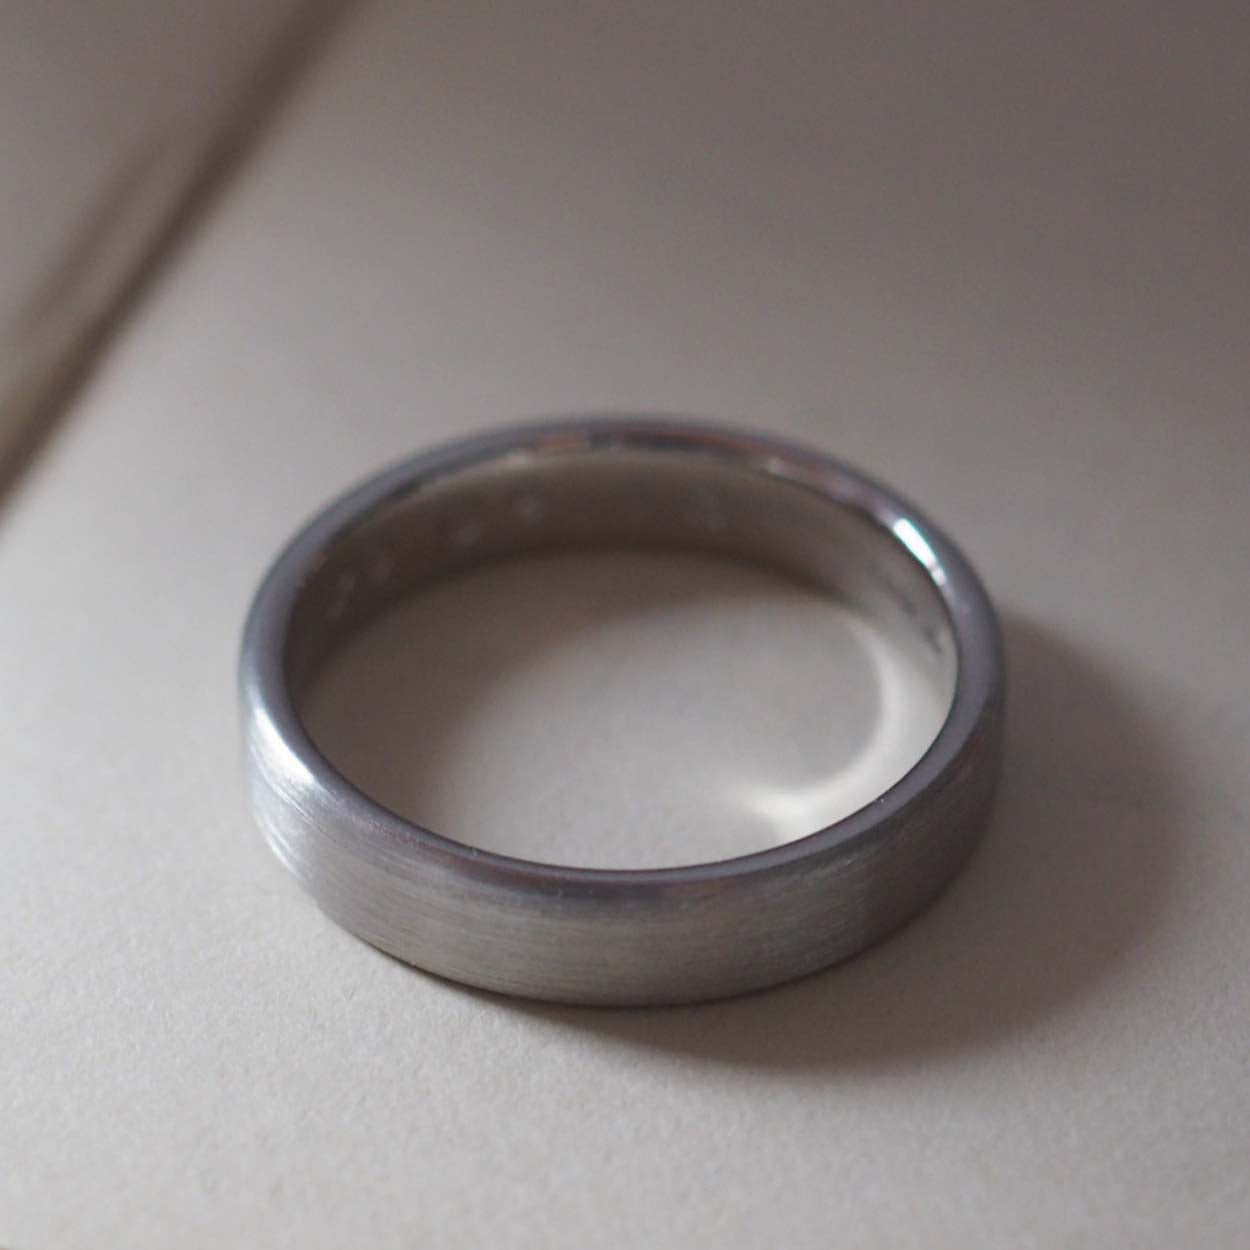 Bianca Jones handcrafted Platinum Wedding Band from London, Customisable in Various Widths and Profiles